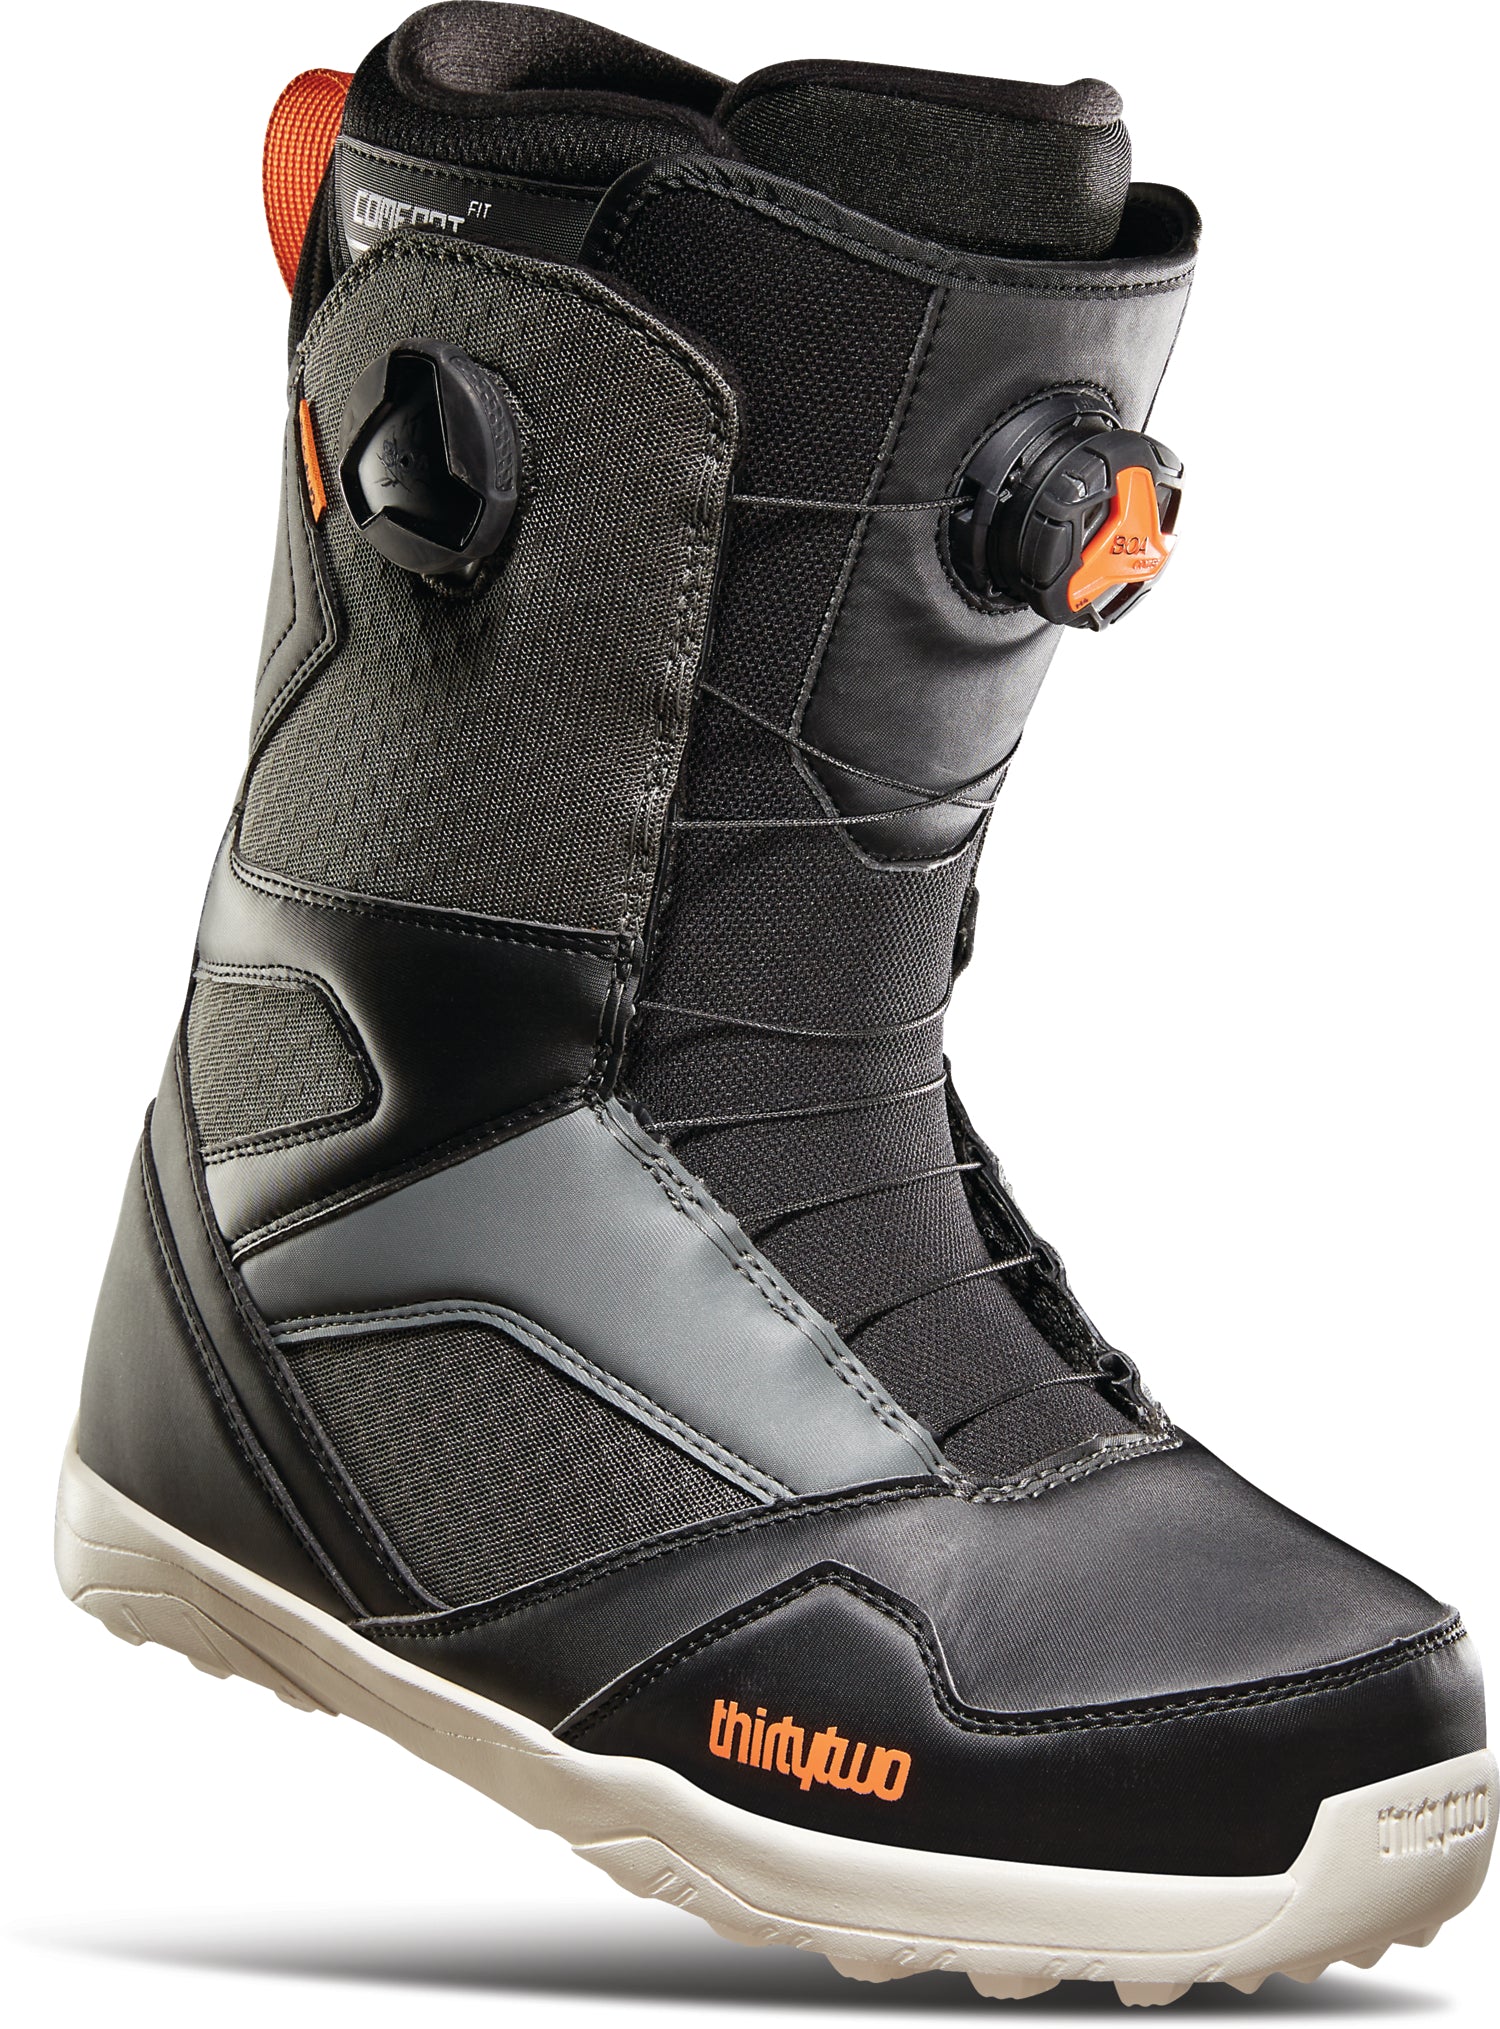 thirtytwo-stw-double-boa-snowboard-boots-blk-grey-2023